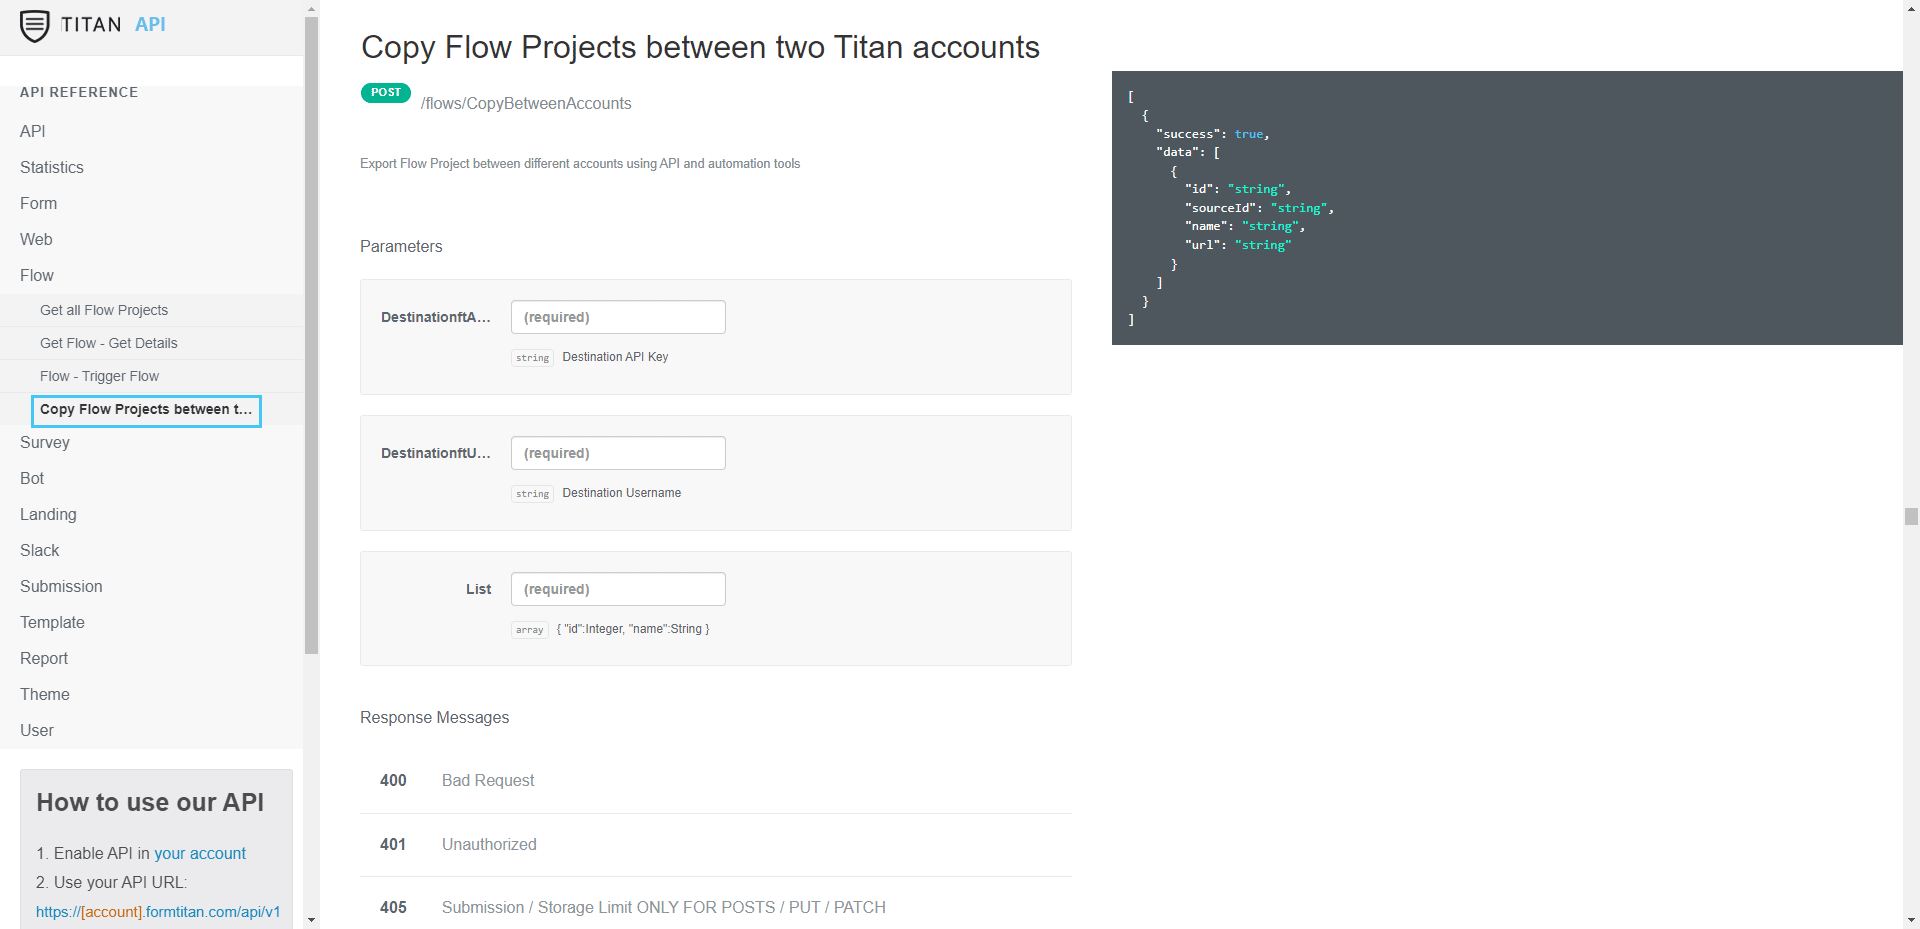 Copy Flow Projects between two Titan accounts